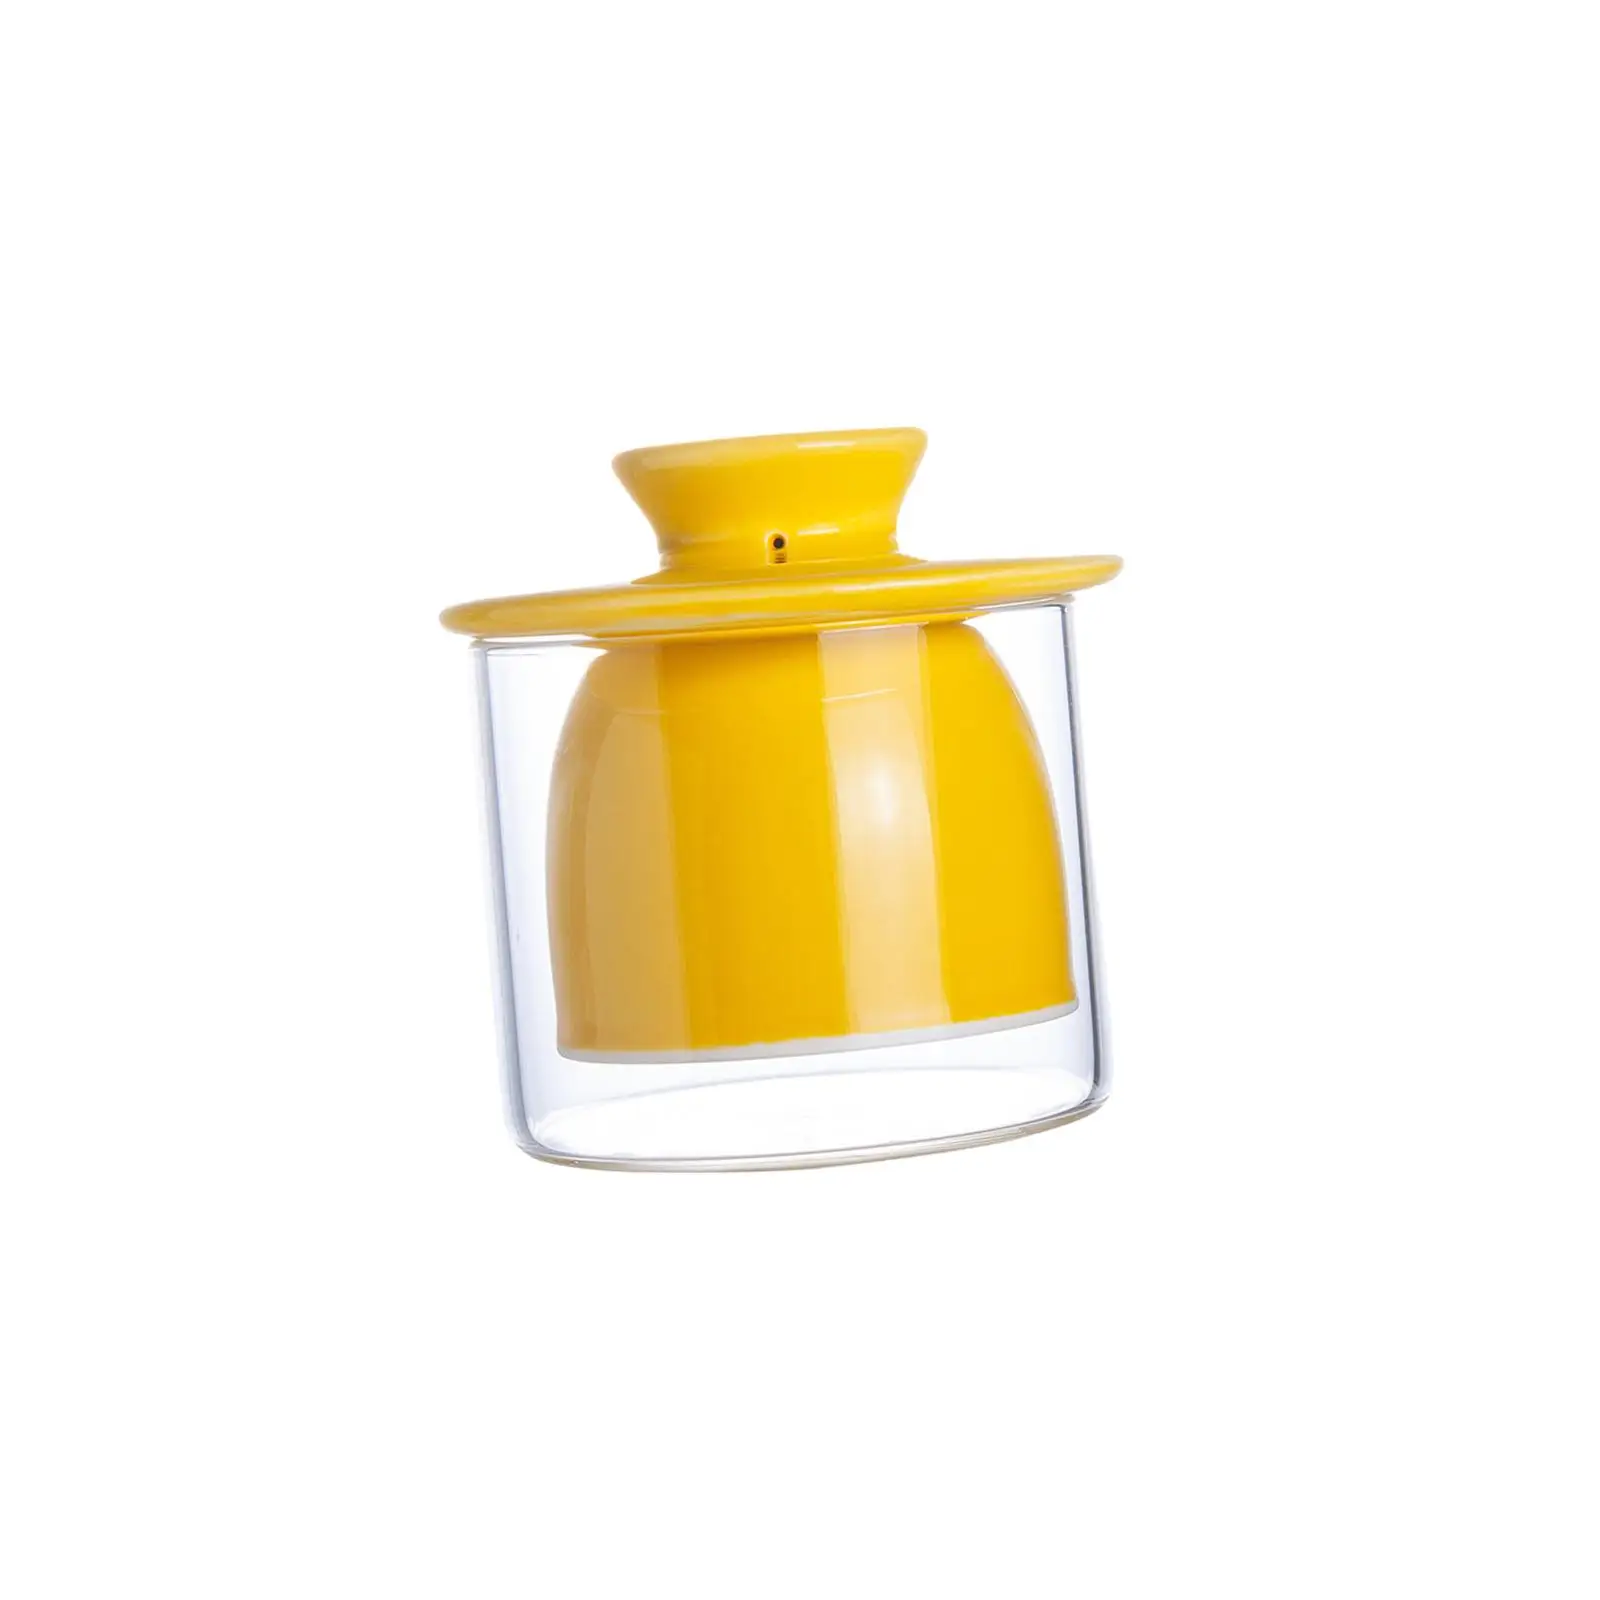 Ceramic, glass butter container, versatile, smooth for the kitchen